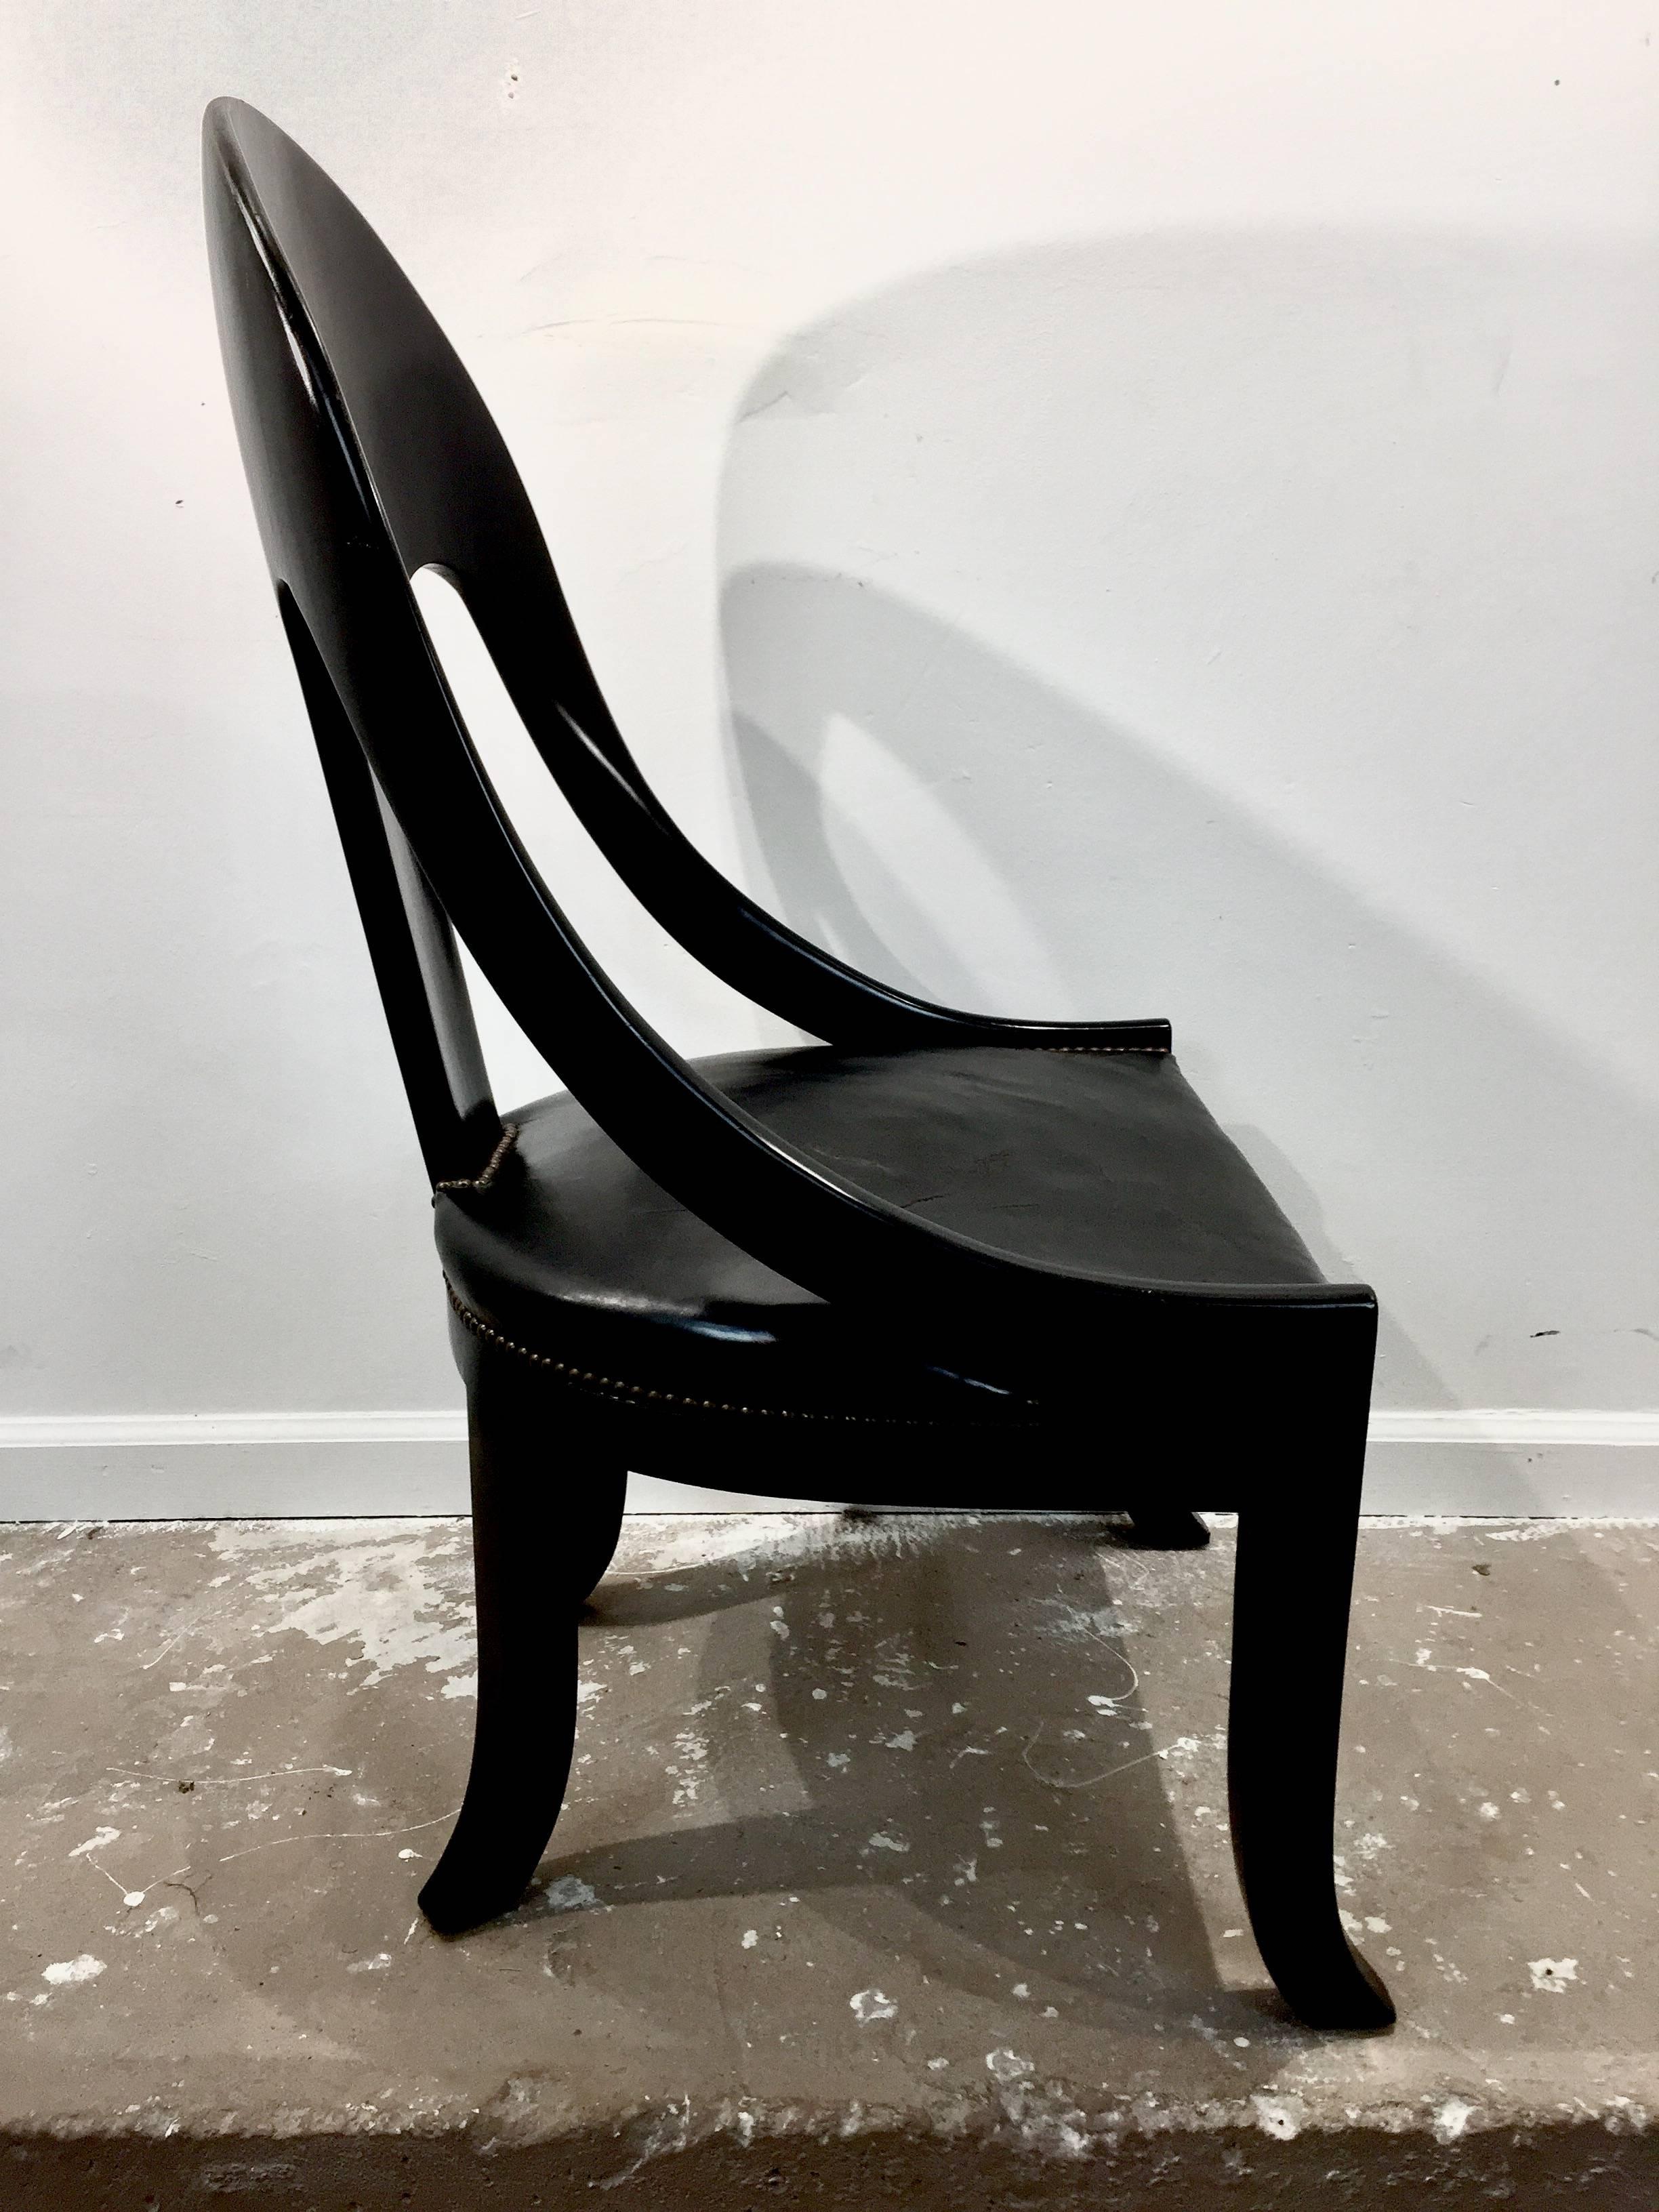 Lacquered Pair of Vintage Black Lacquer Spoon Back Chairs